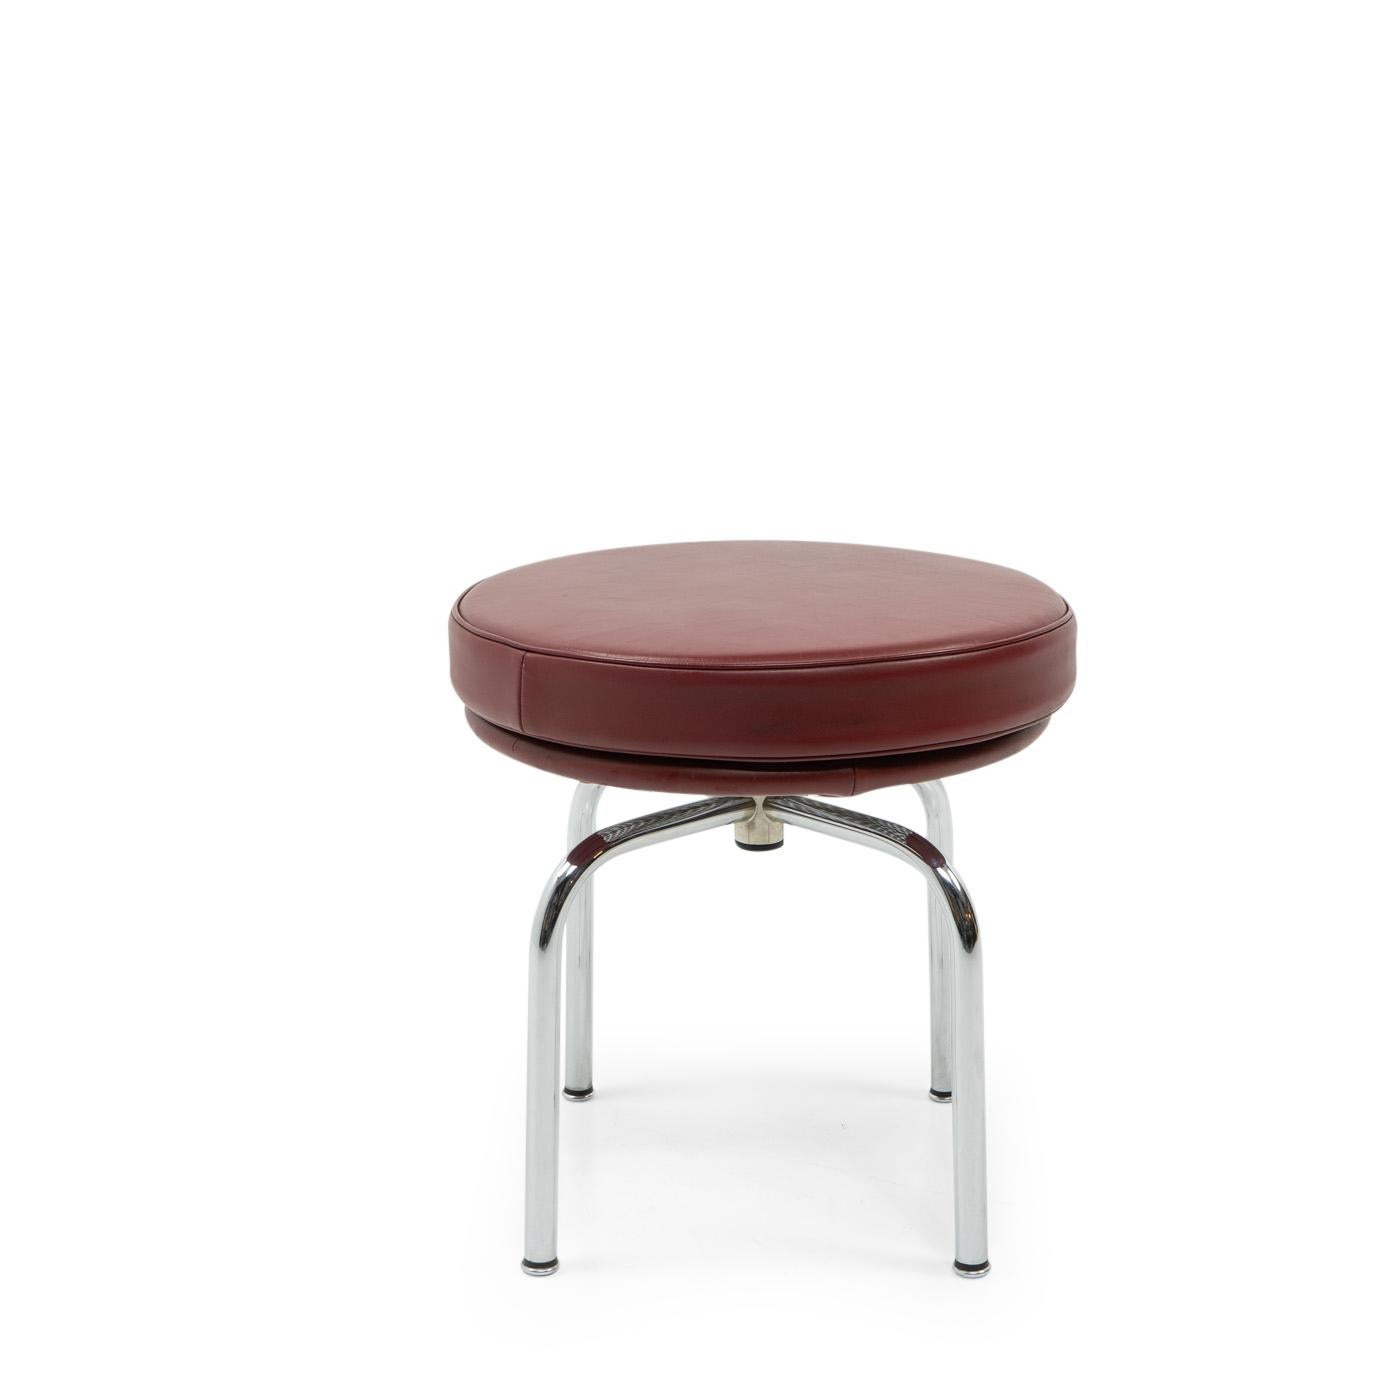 Even though this stool is part of the “LC” collection in production by Cassina, the actual design of this piece was done by Charlotte Perriand, together with the matching chair (LC7).

Perriand designed this stool for her own apartment in Paris